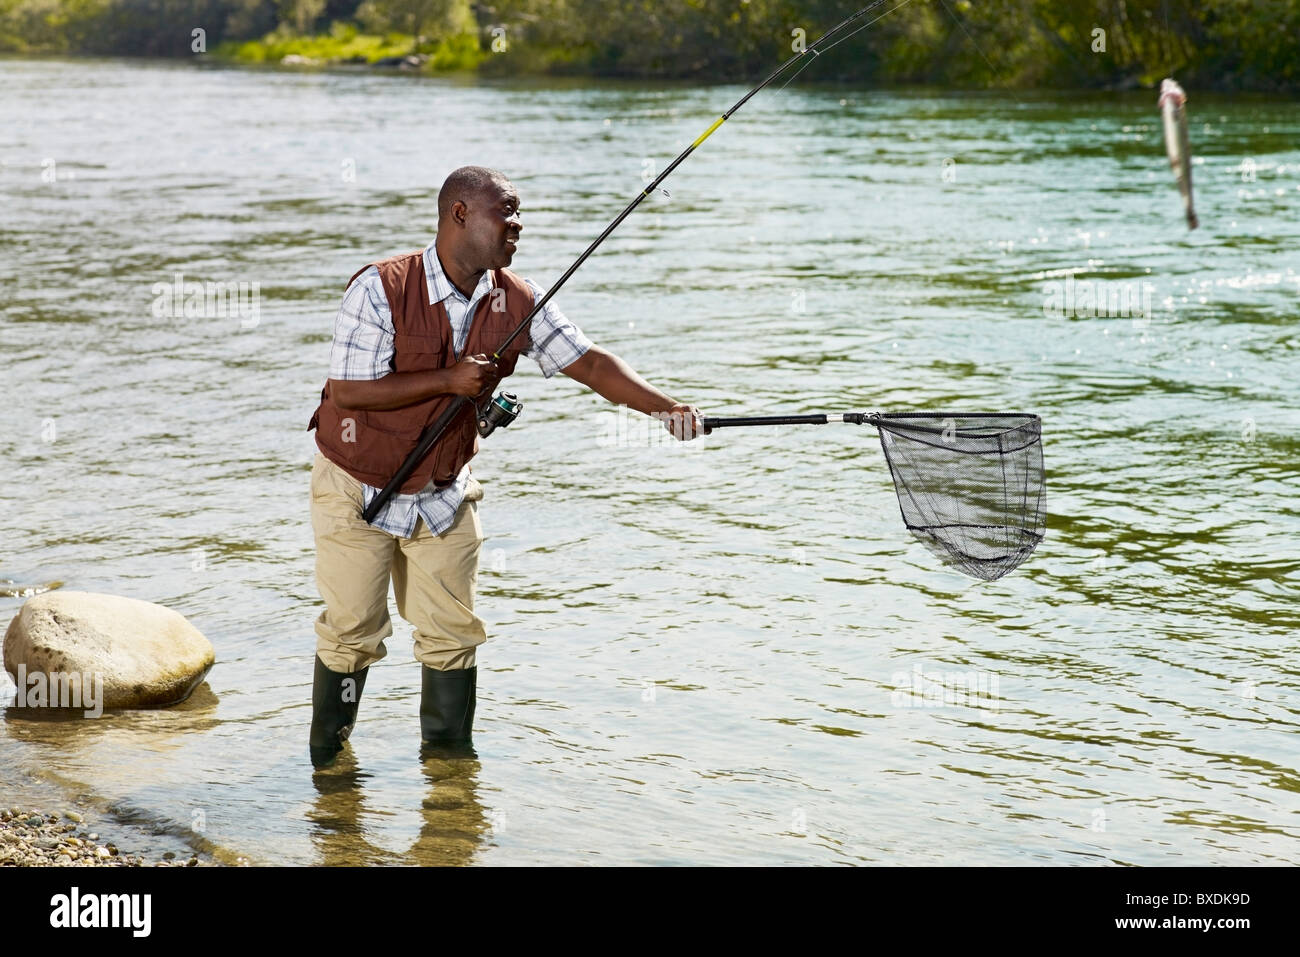 Black man with net catching fish in stream Stock Photo - Alamy